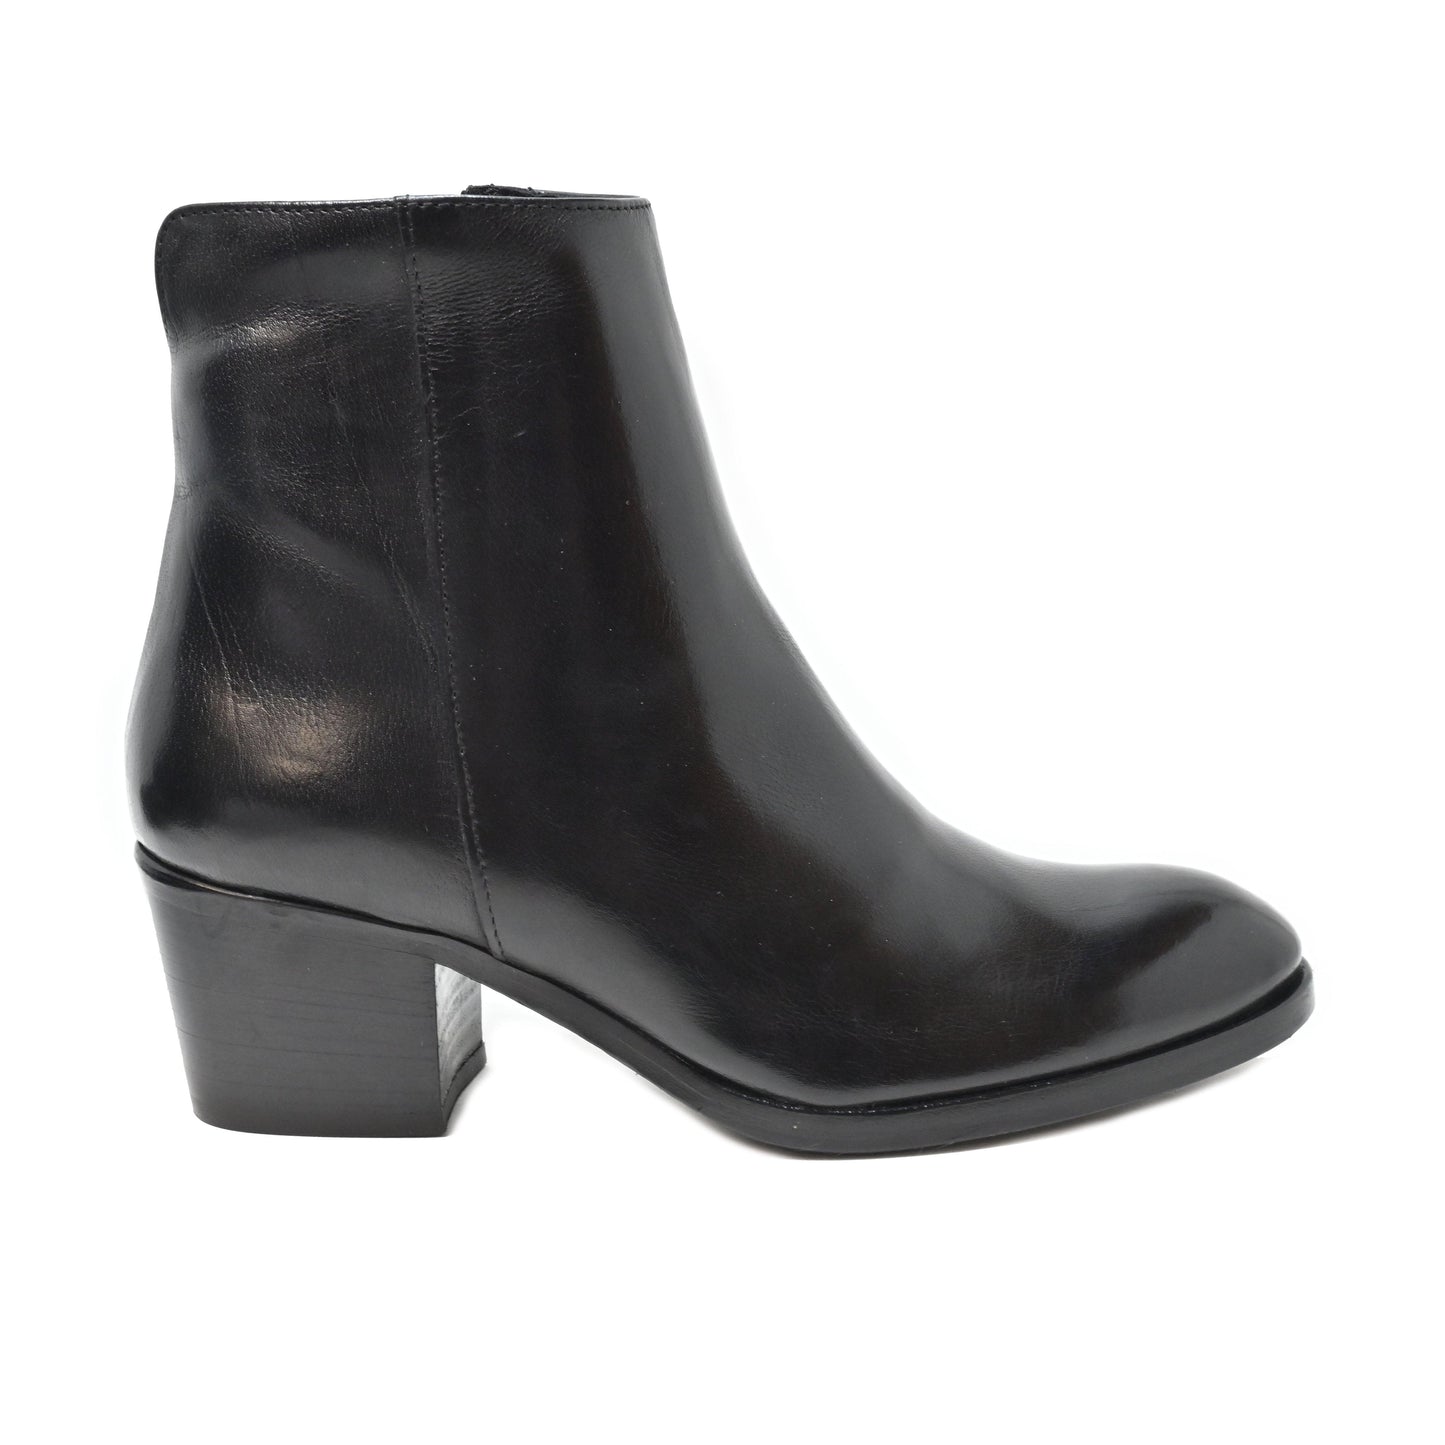 IDA 01 - ankle boots leather BLACK - History541